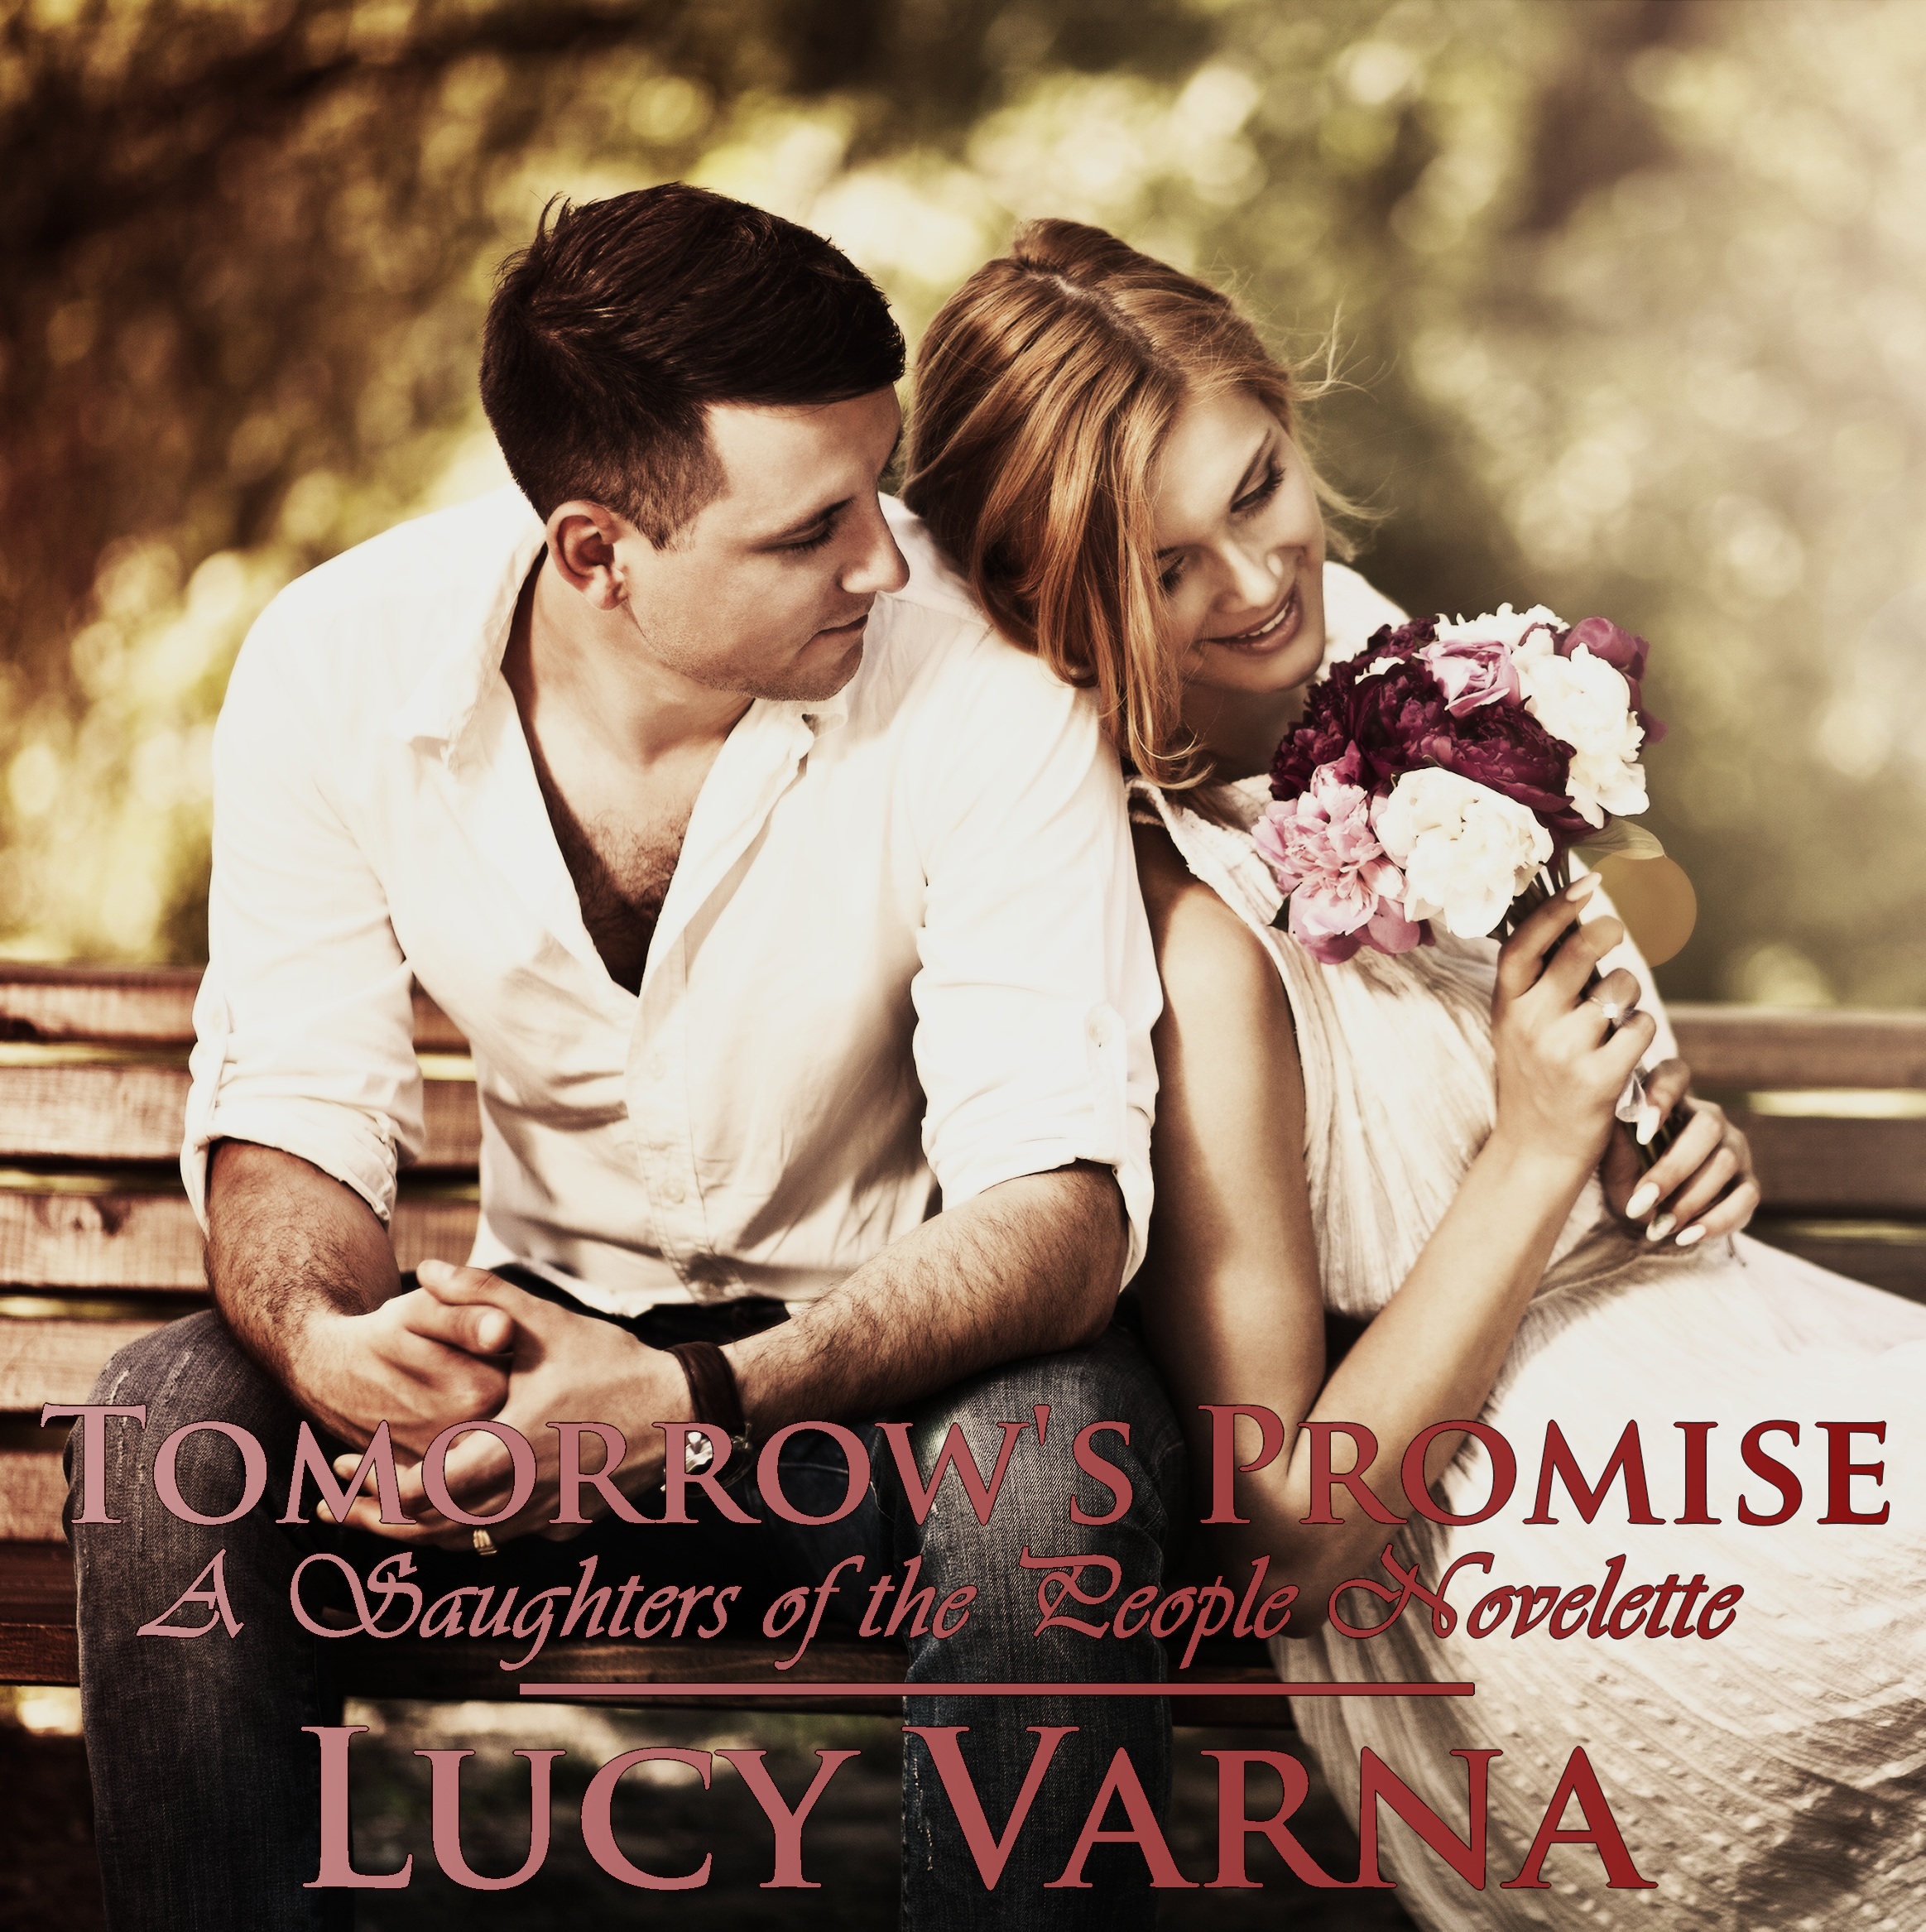 Tomorrow's Promise (A Daughters of the People Novelette) by Lucy Varna